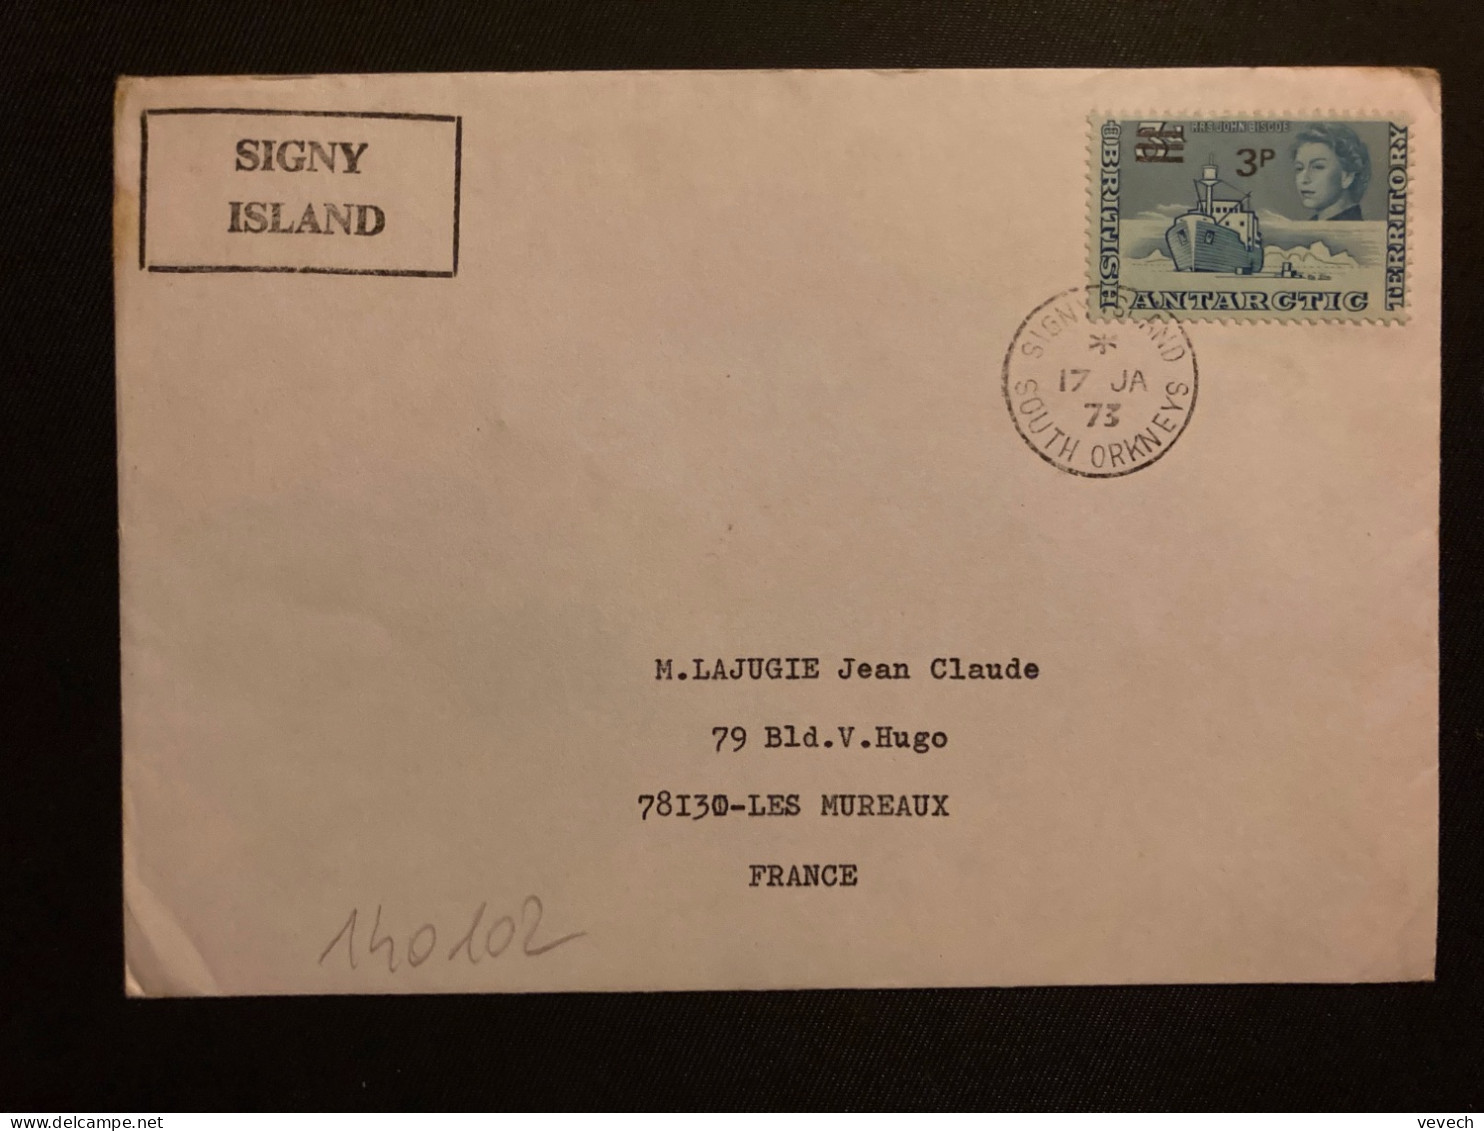 LETTRE SIGNY ISLAND TP RRS JOHN BISCOE 3d Surch.3p OBL.17 JA  73 SIGNY ISLAND SOUTH ORKNEYS - Lettres & Documents